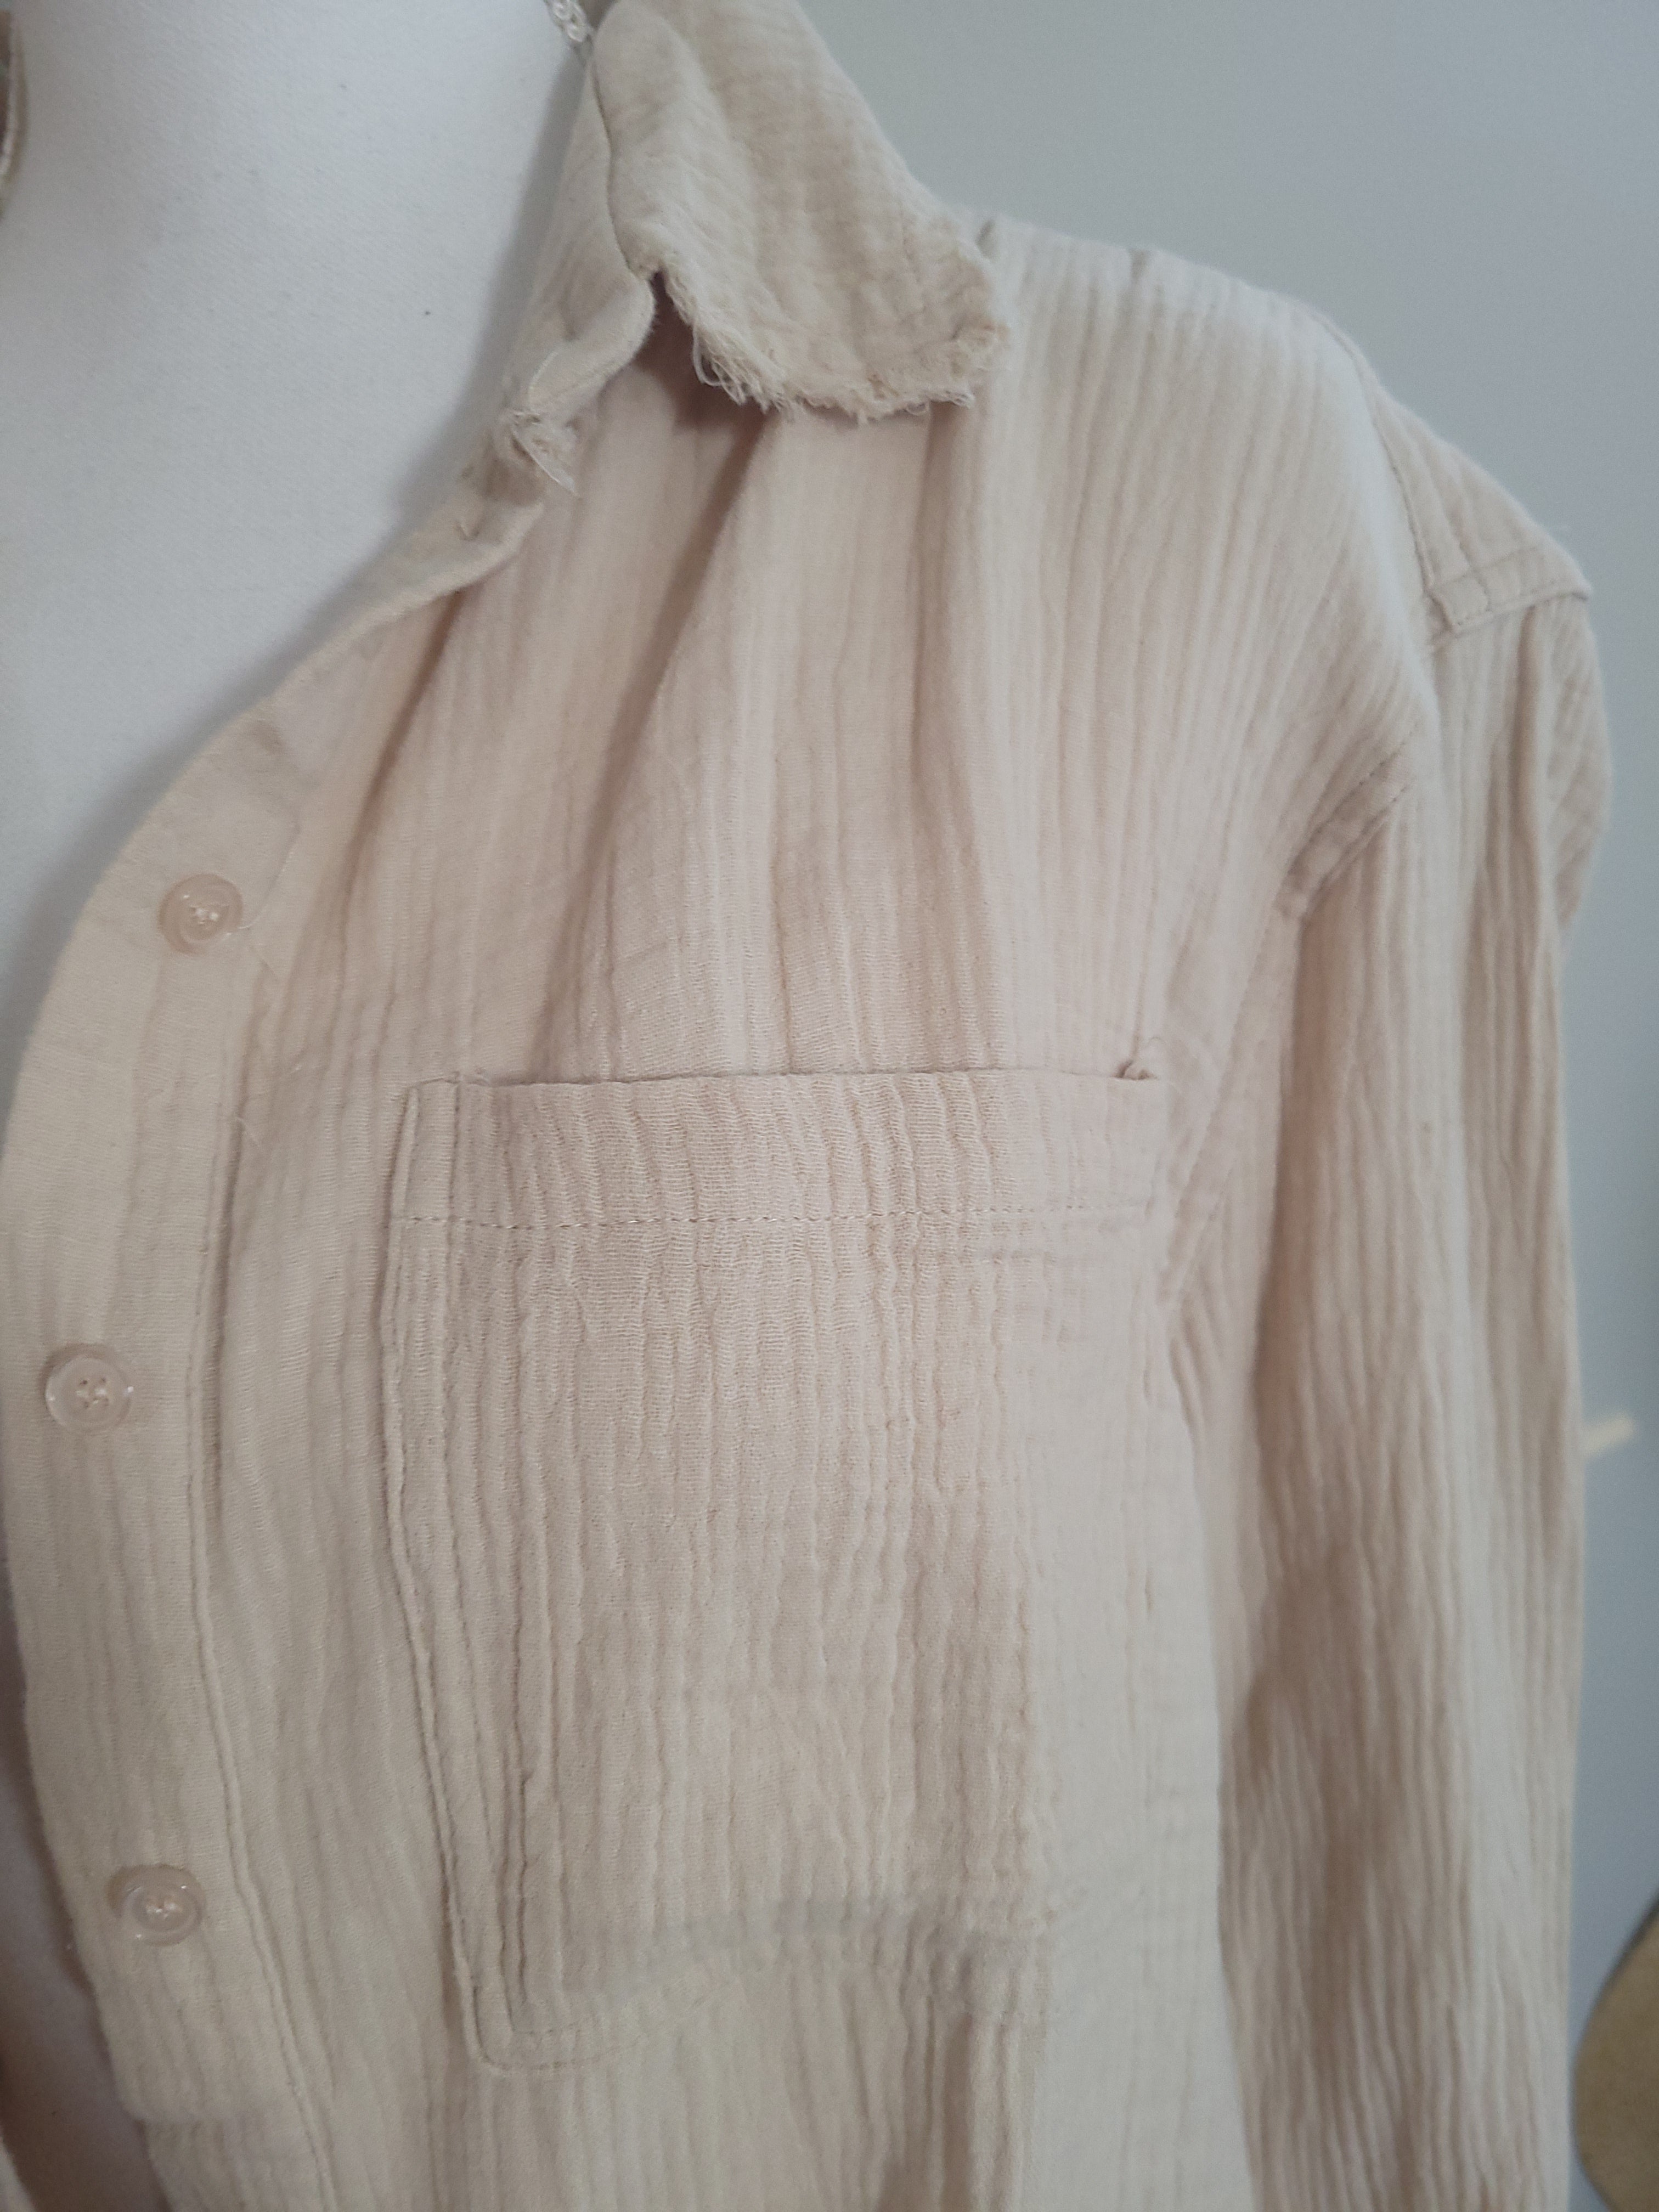 Oversized Long Sleeve Raw Edge Button Down Top-Beige